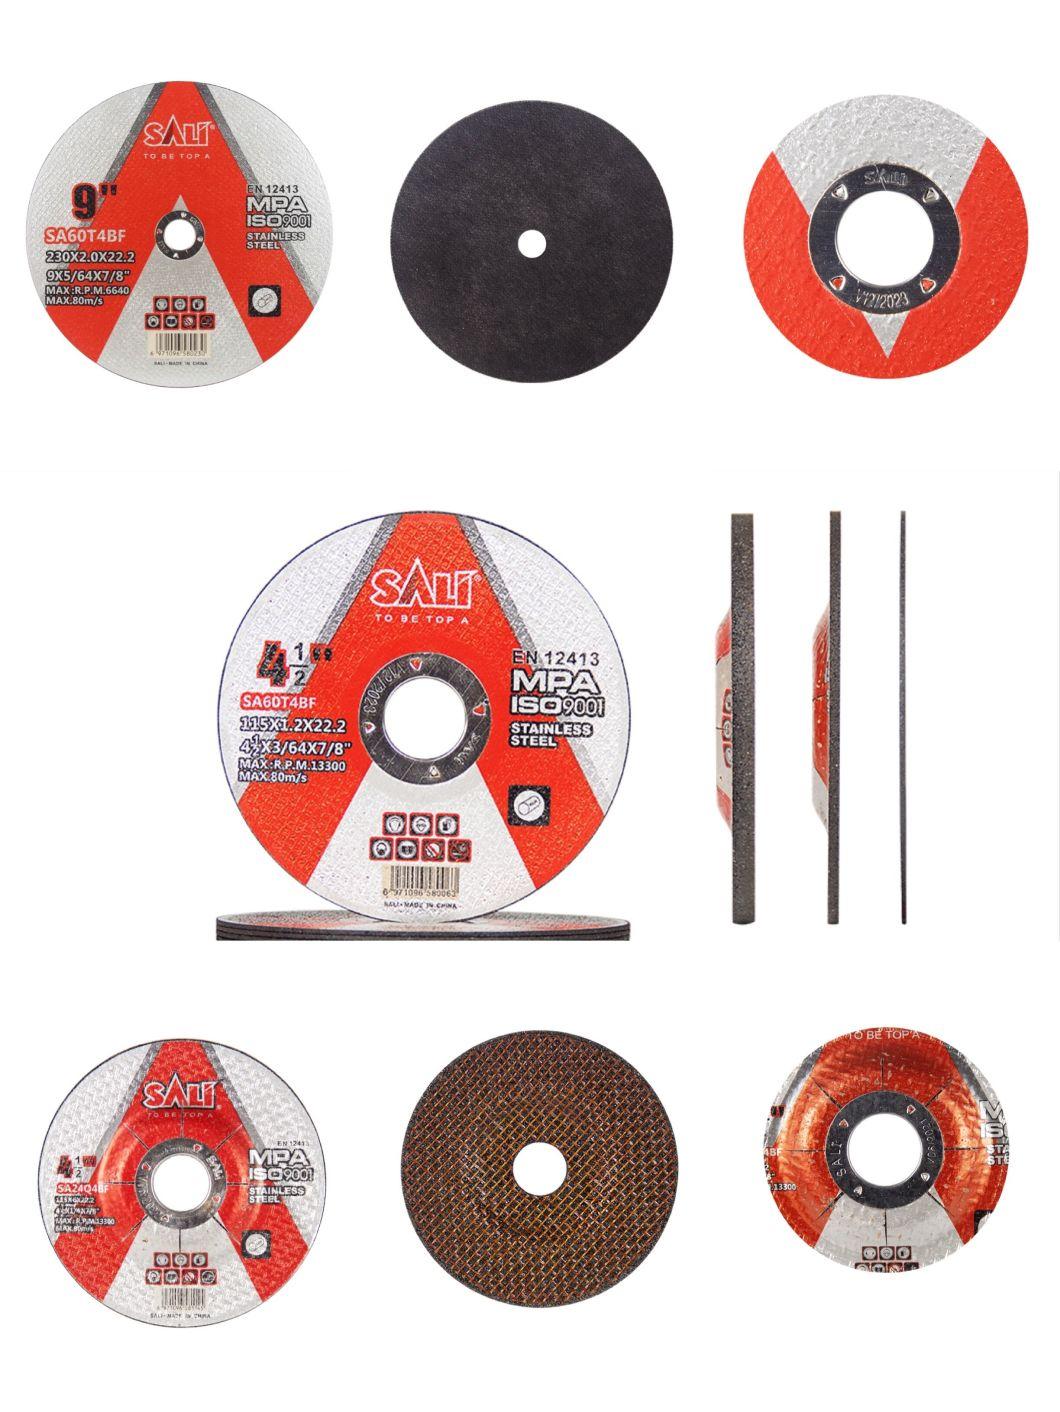 Sali 5inch 125*1.2*22mm Professonal Quality Stainless Steel Cutting Disc